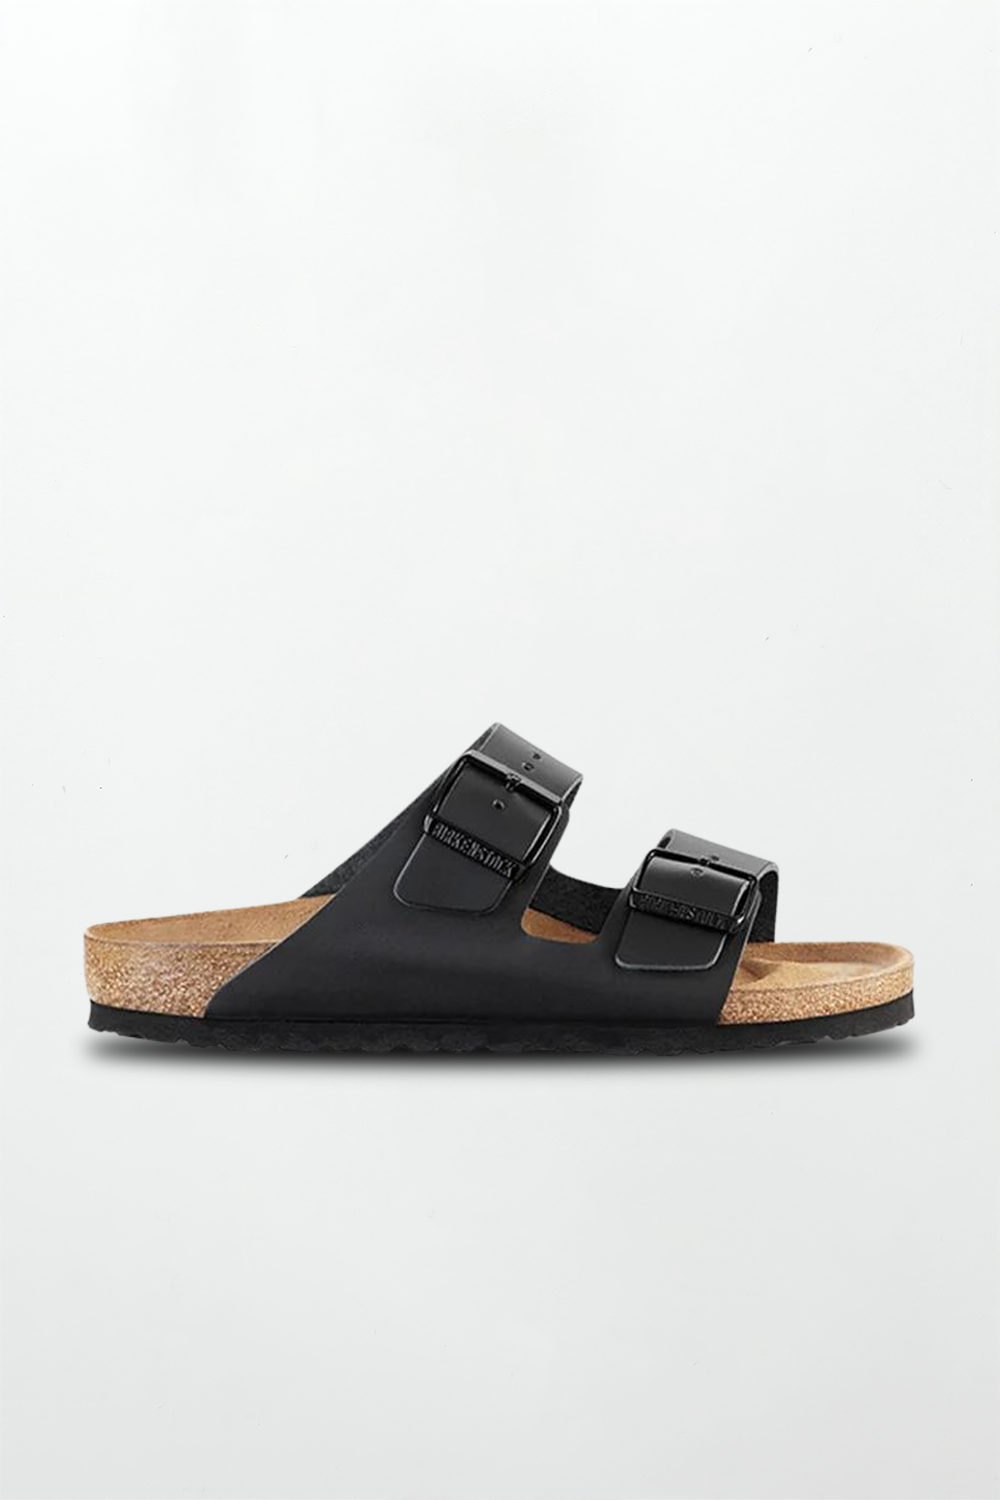 Arizona Smooth Leather in Black (Classic Footbed - Suede Lined)